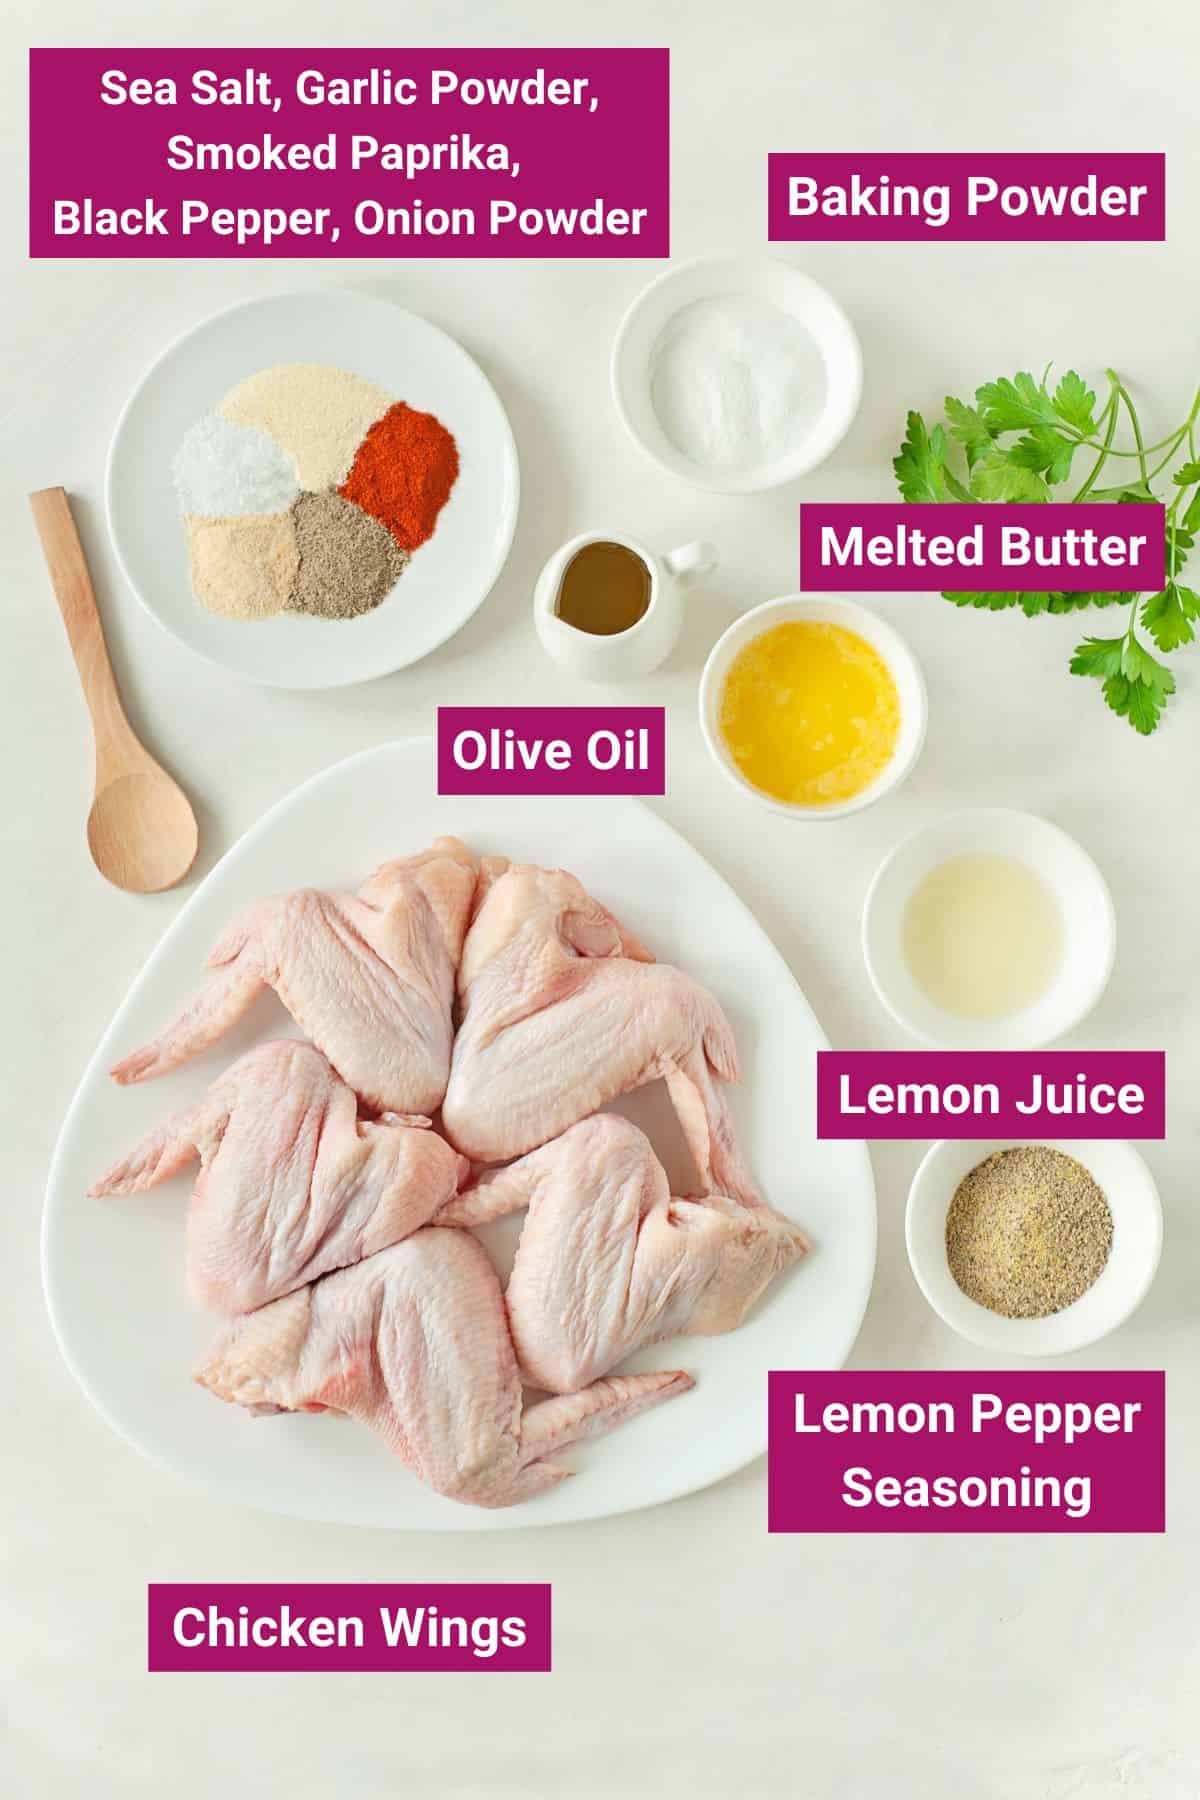 different spices, baking powder, melted butter, olive oil, lemon pepper seasoning, lemon juice and chicken wings on separate containers